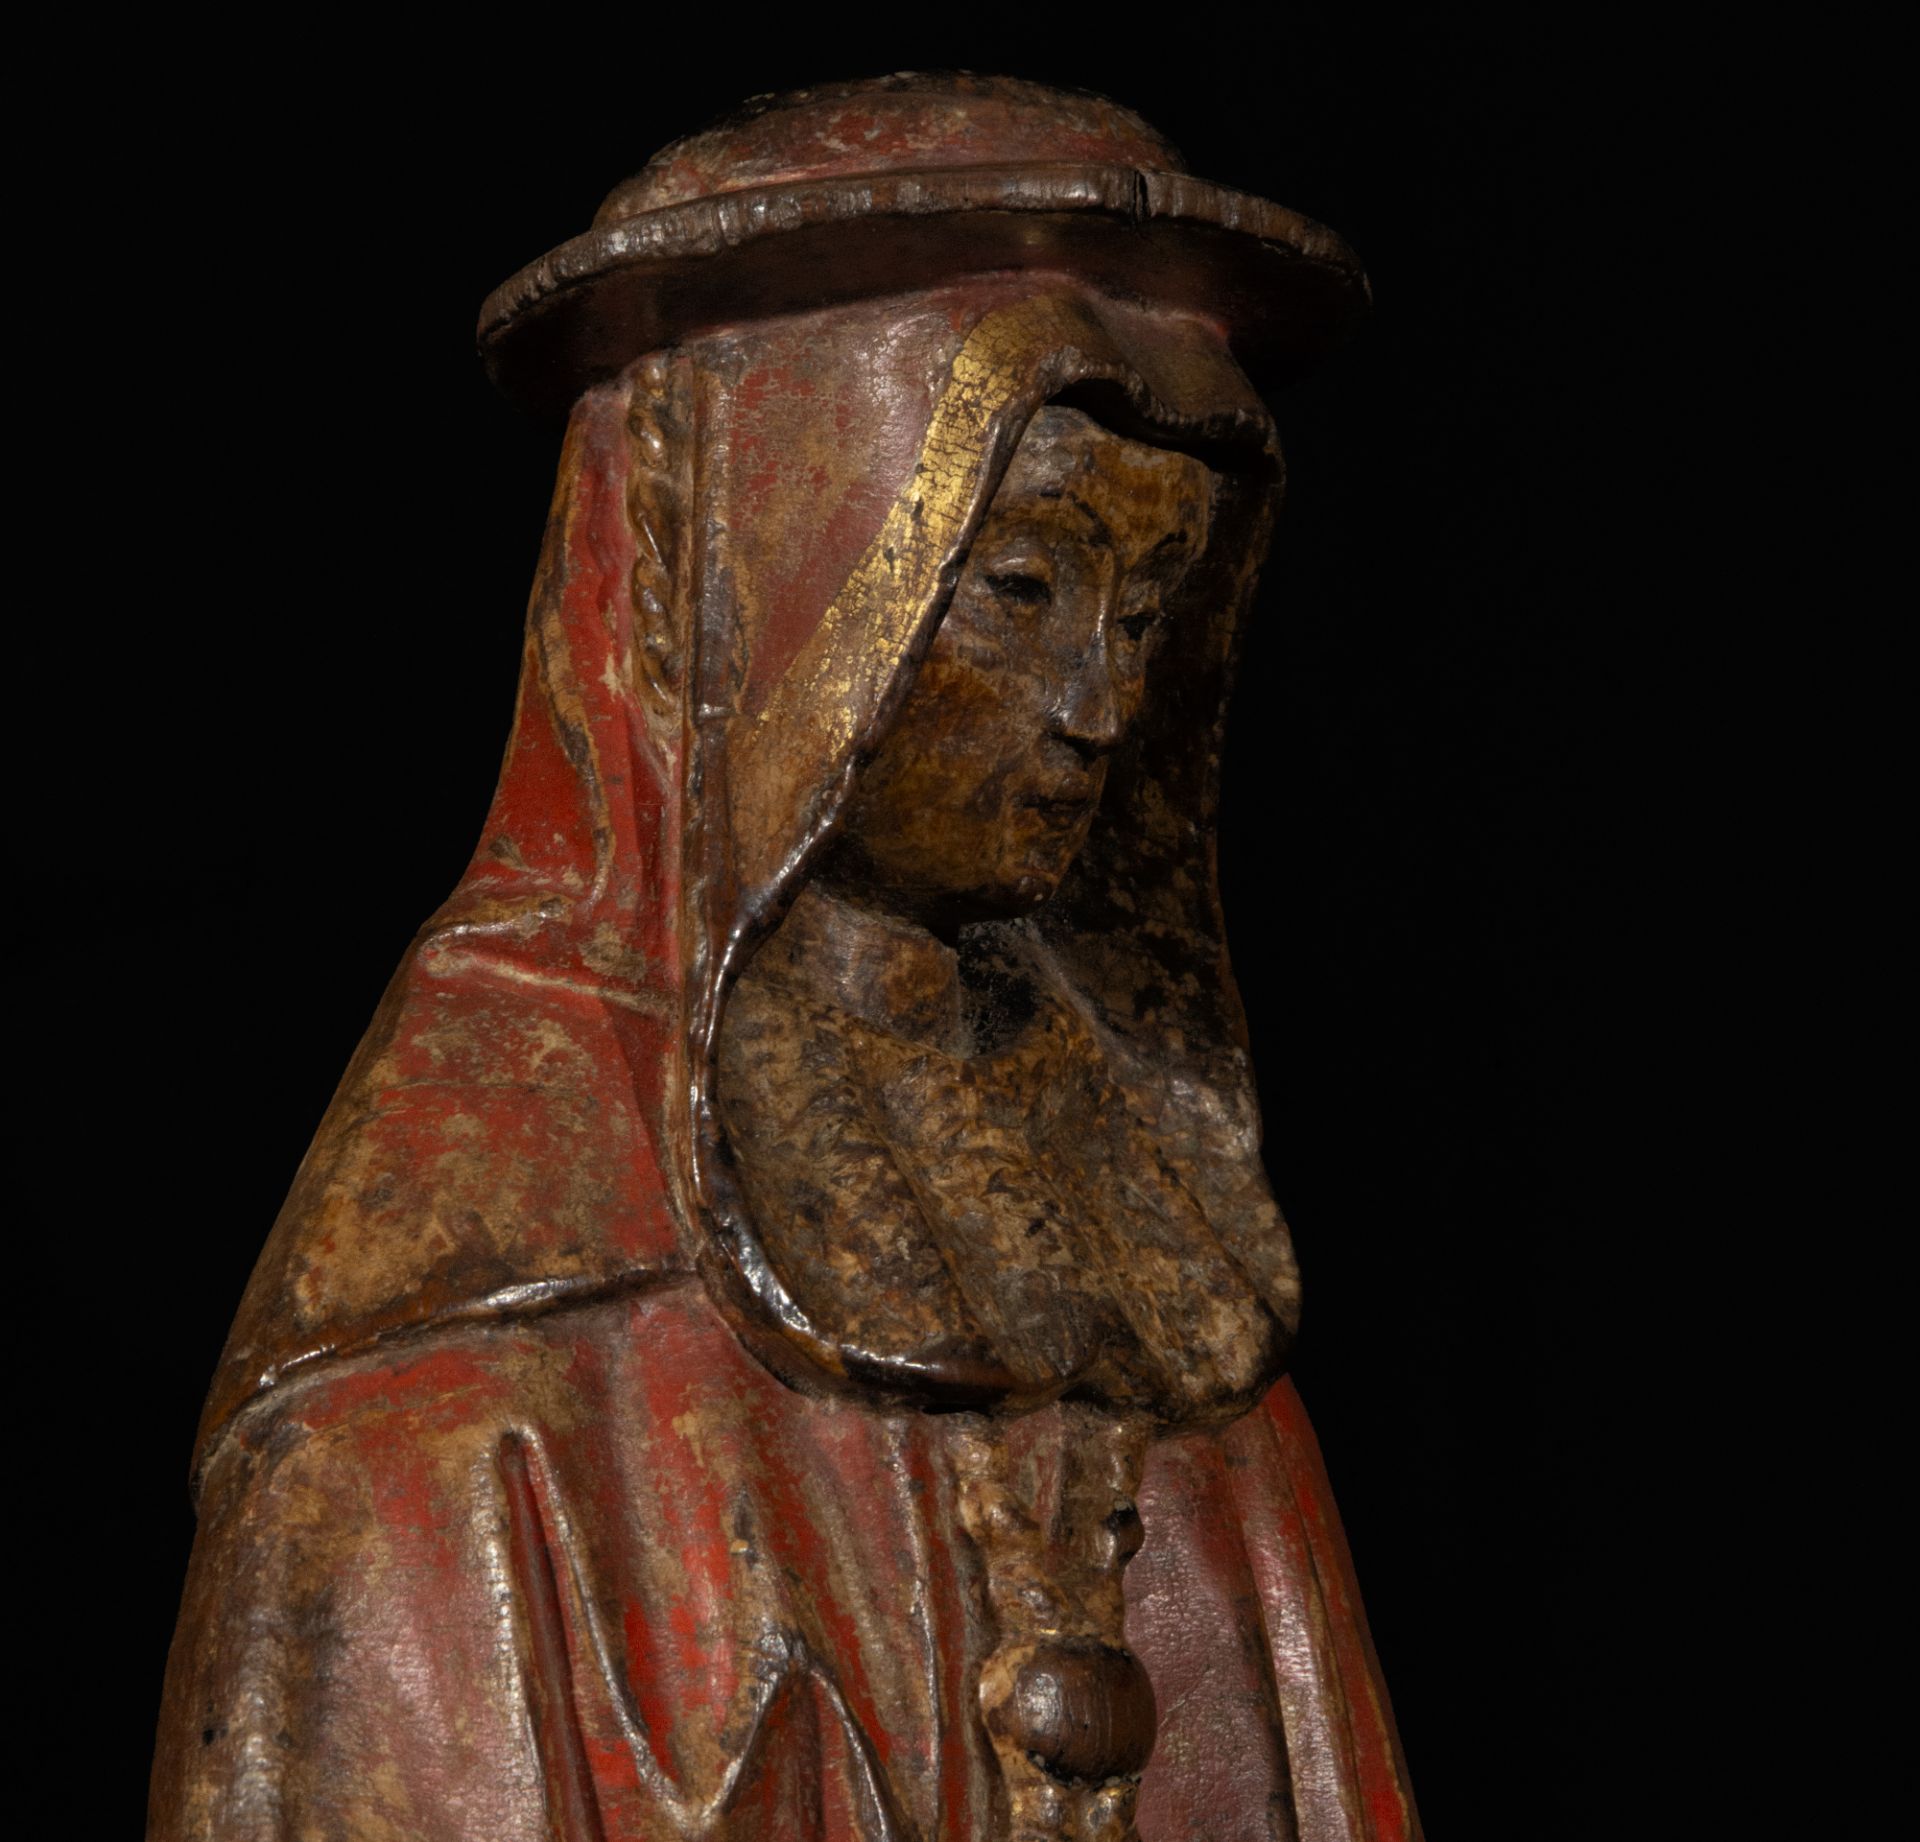 Spectacular Gothic Carving from Mechelen of Cardenal from the 15th century, with original polychrome - Image 5 of 7